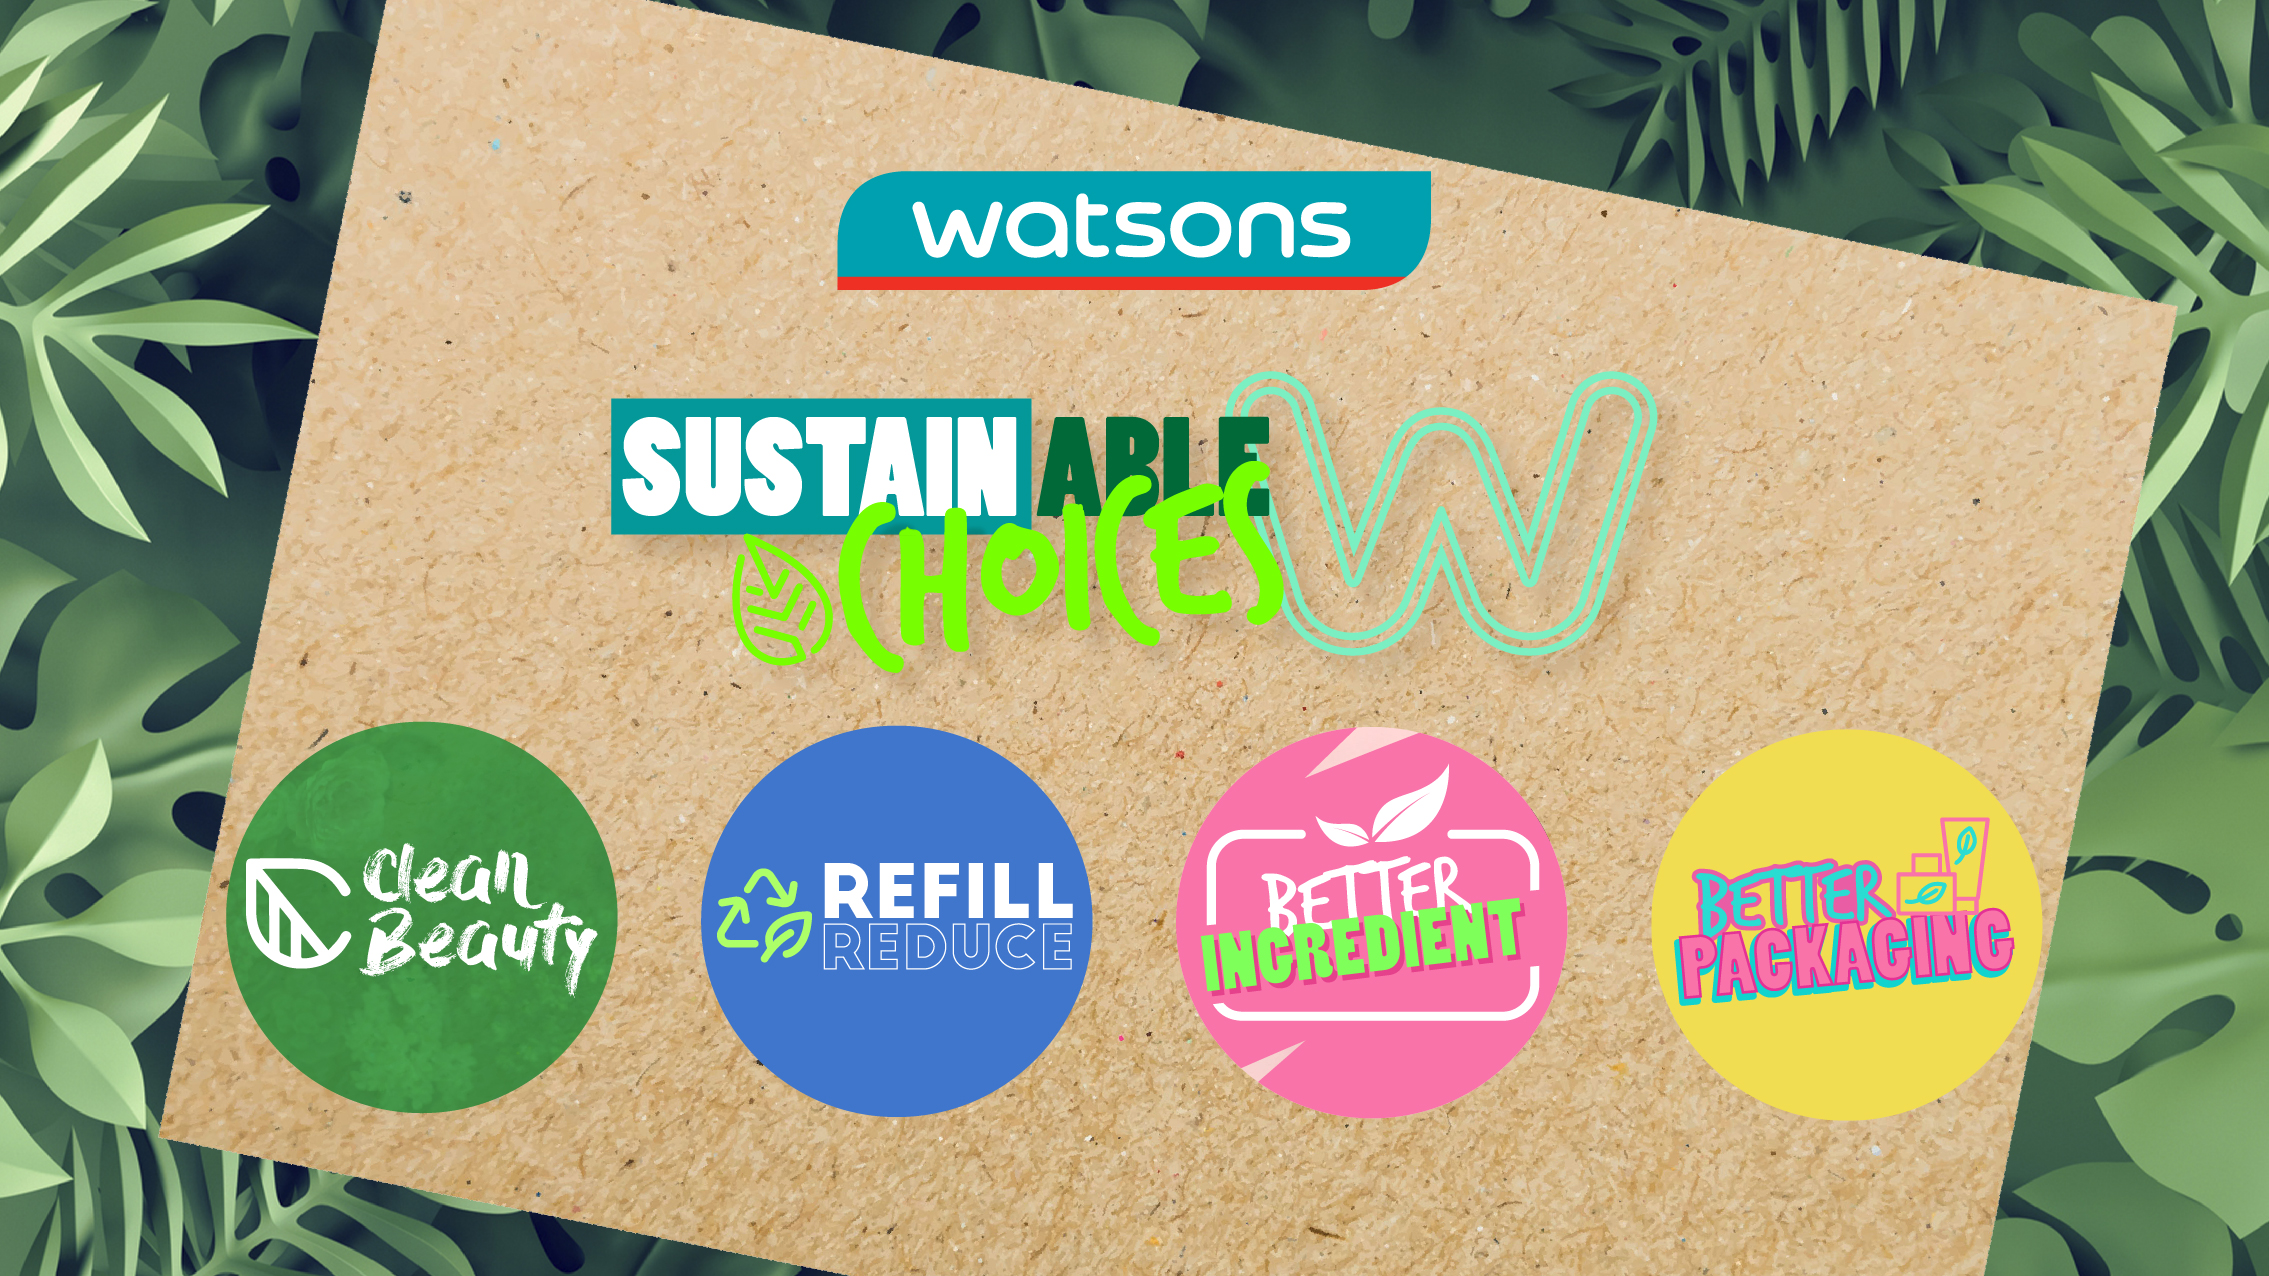 Watsons Sustainability Sustainable Choices